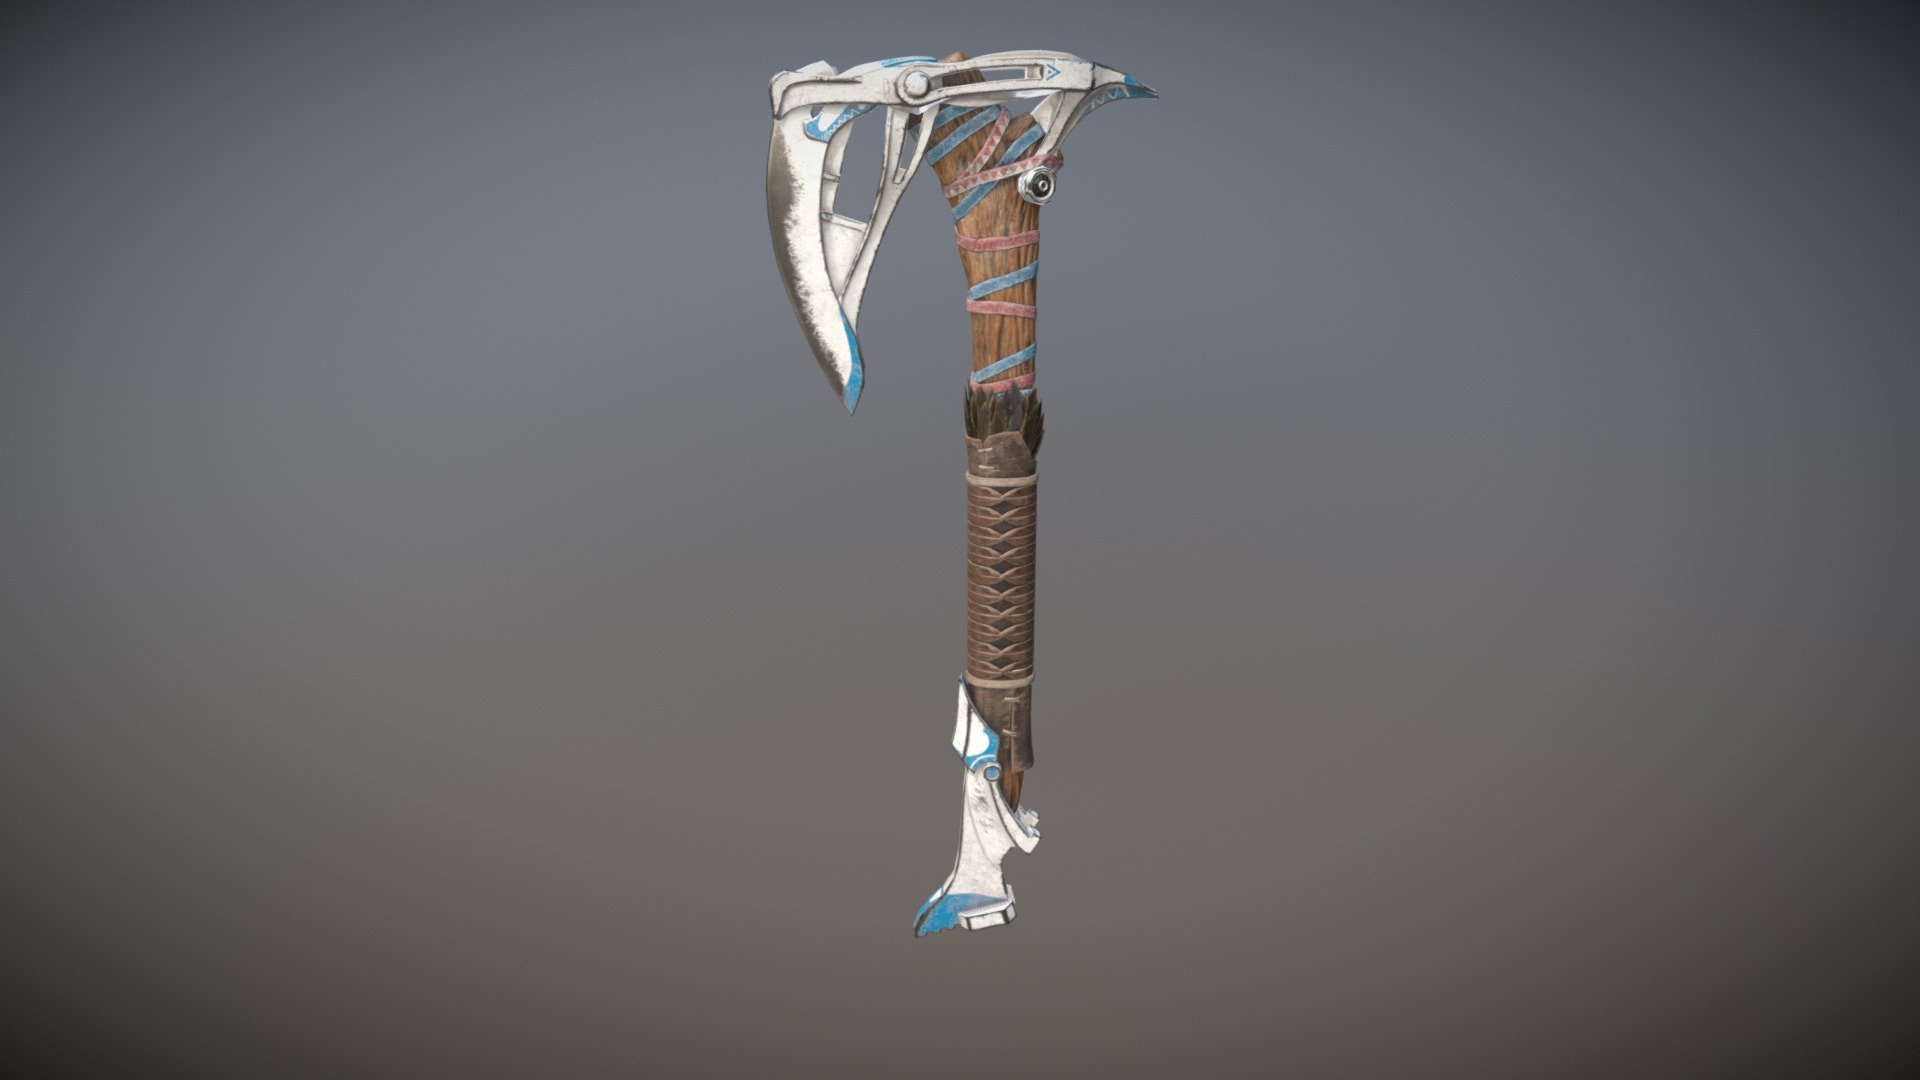 Axe designed with Horizon's overall artstyle in mind. Many of the parts are based on original weapons from the game.
Concept, modeling and texturing by me.

I got lazy with the tris, 11k is bit much

2k texture for body and additional for feathers - Axe inspired by Horizon: Zero Dawn - 3D model by Naxster 3d model